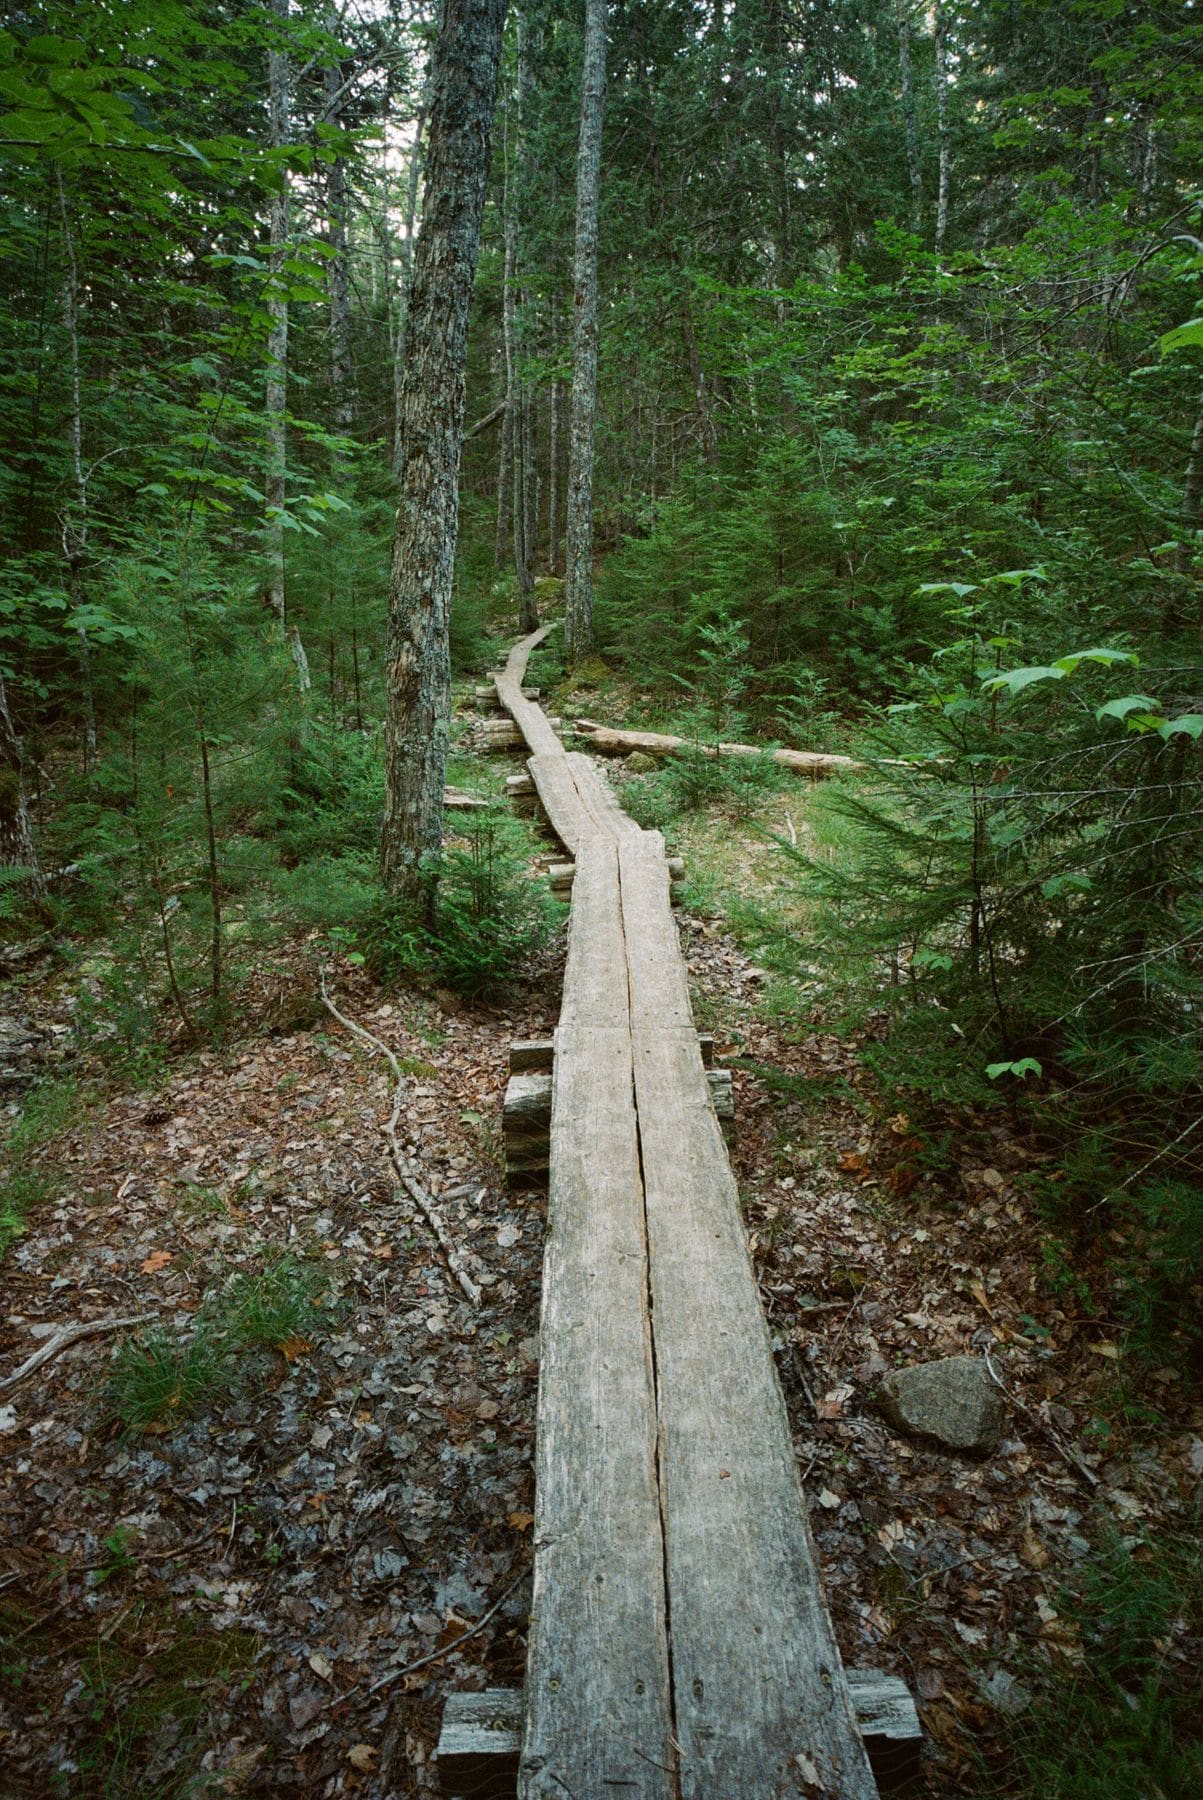 Wooden planks on logs create a winding trail through the woods in mount desert island maine